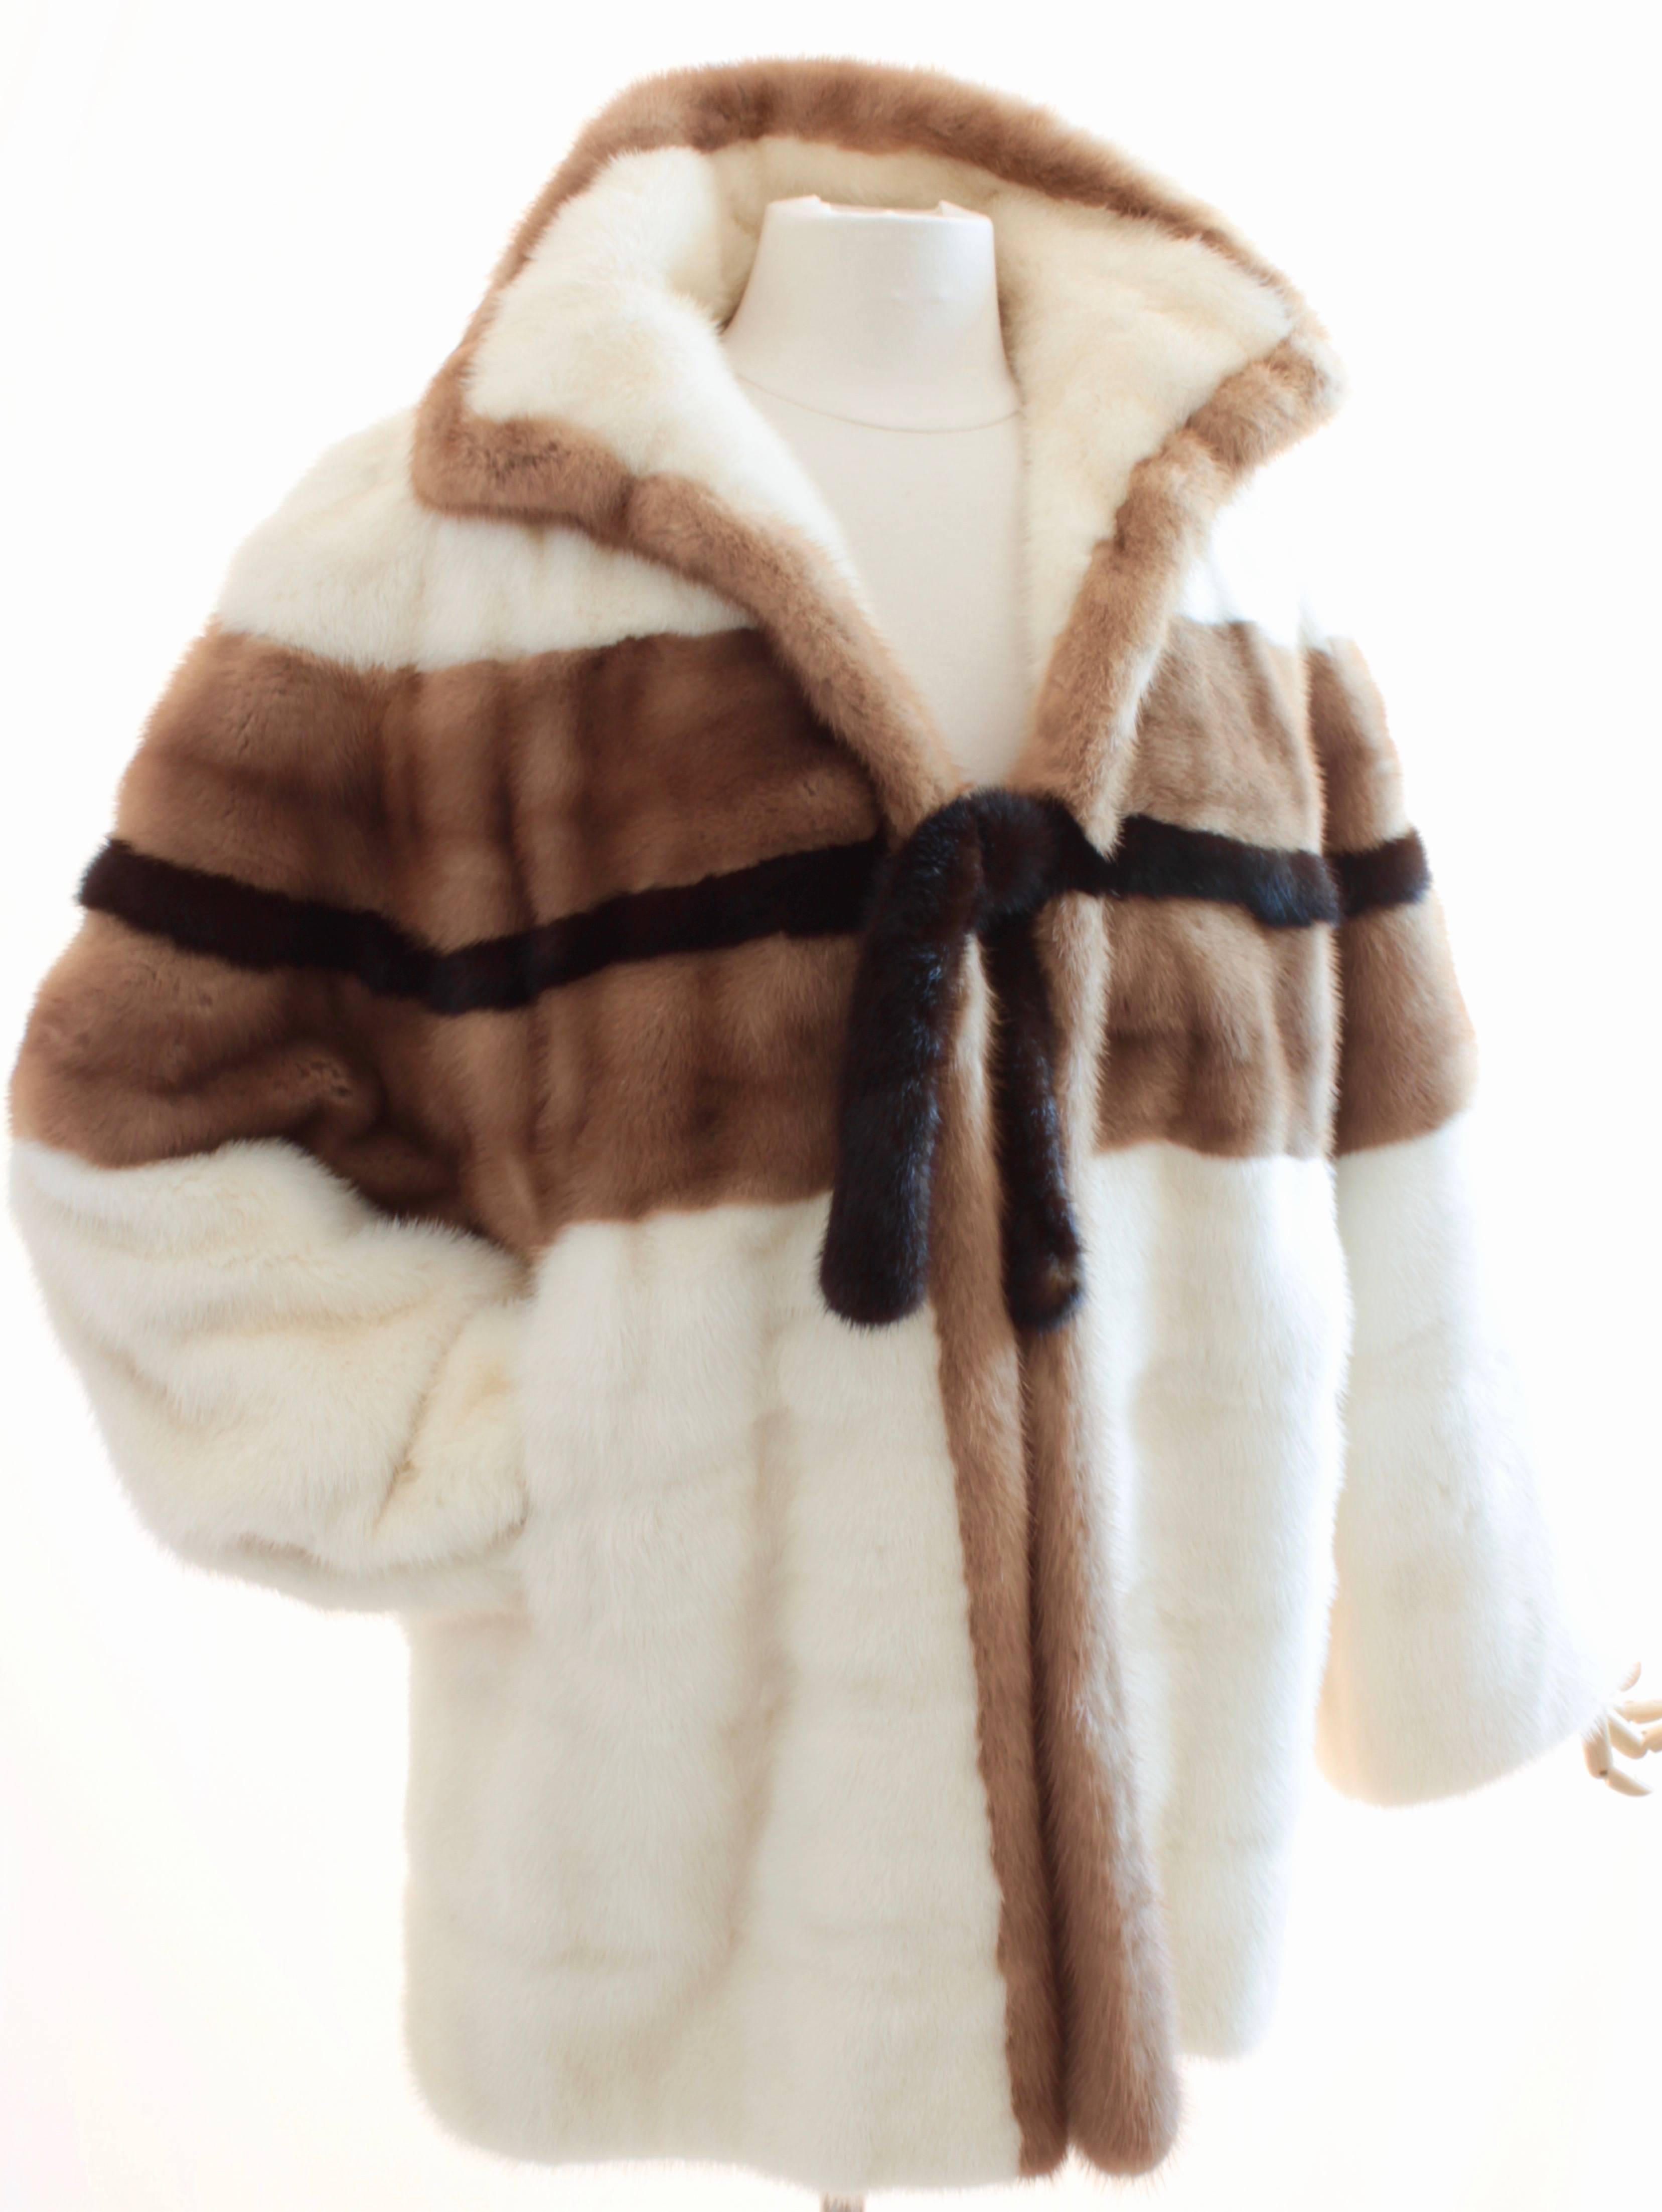 This gorgeous jacket was made by Grosvenor Canada exclusively for Bonwit Teller, most likely in the late 70s.  Made from genuine mink in white, pastel and ranch, it features a wide lapel (perfect for standing up), slightly belled sleeves, fur wrap